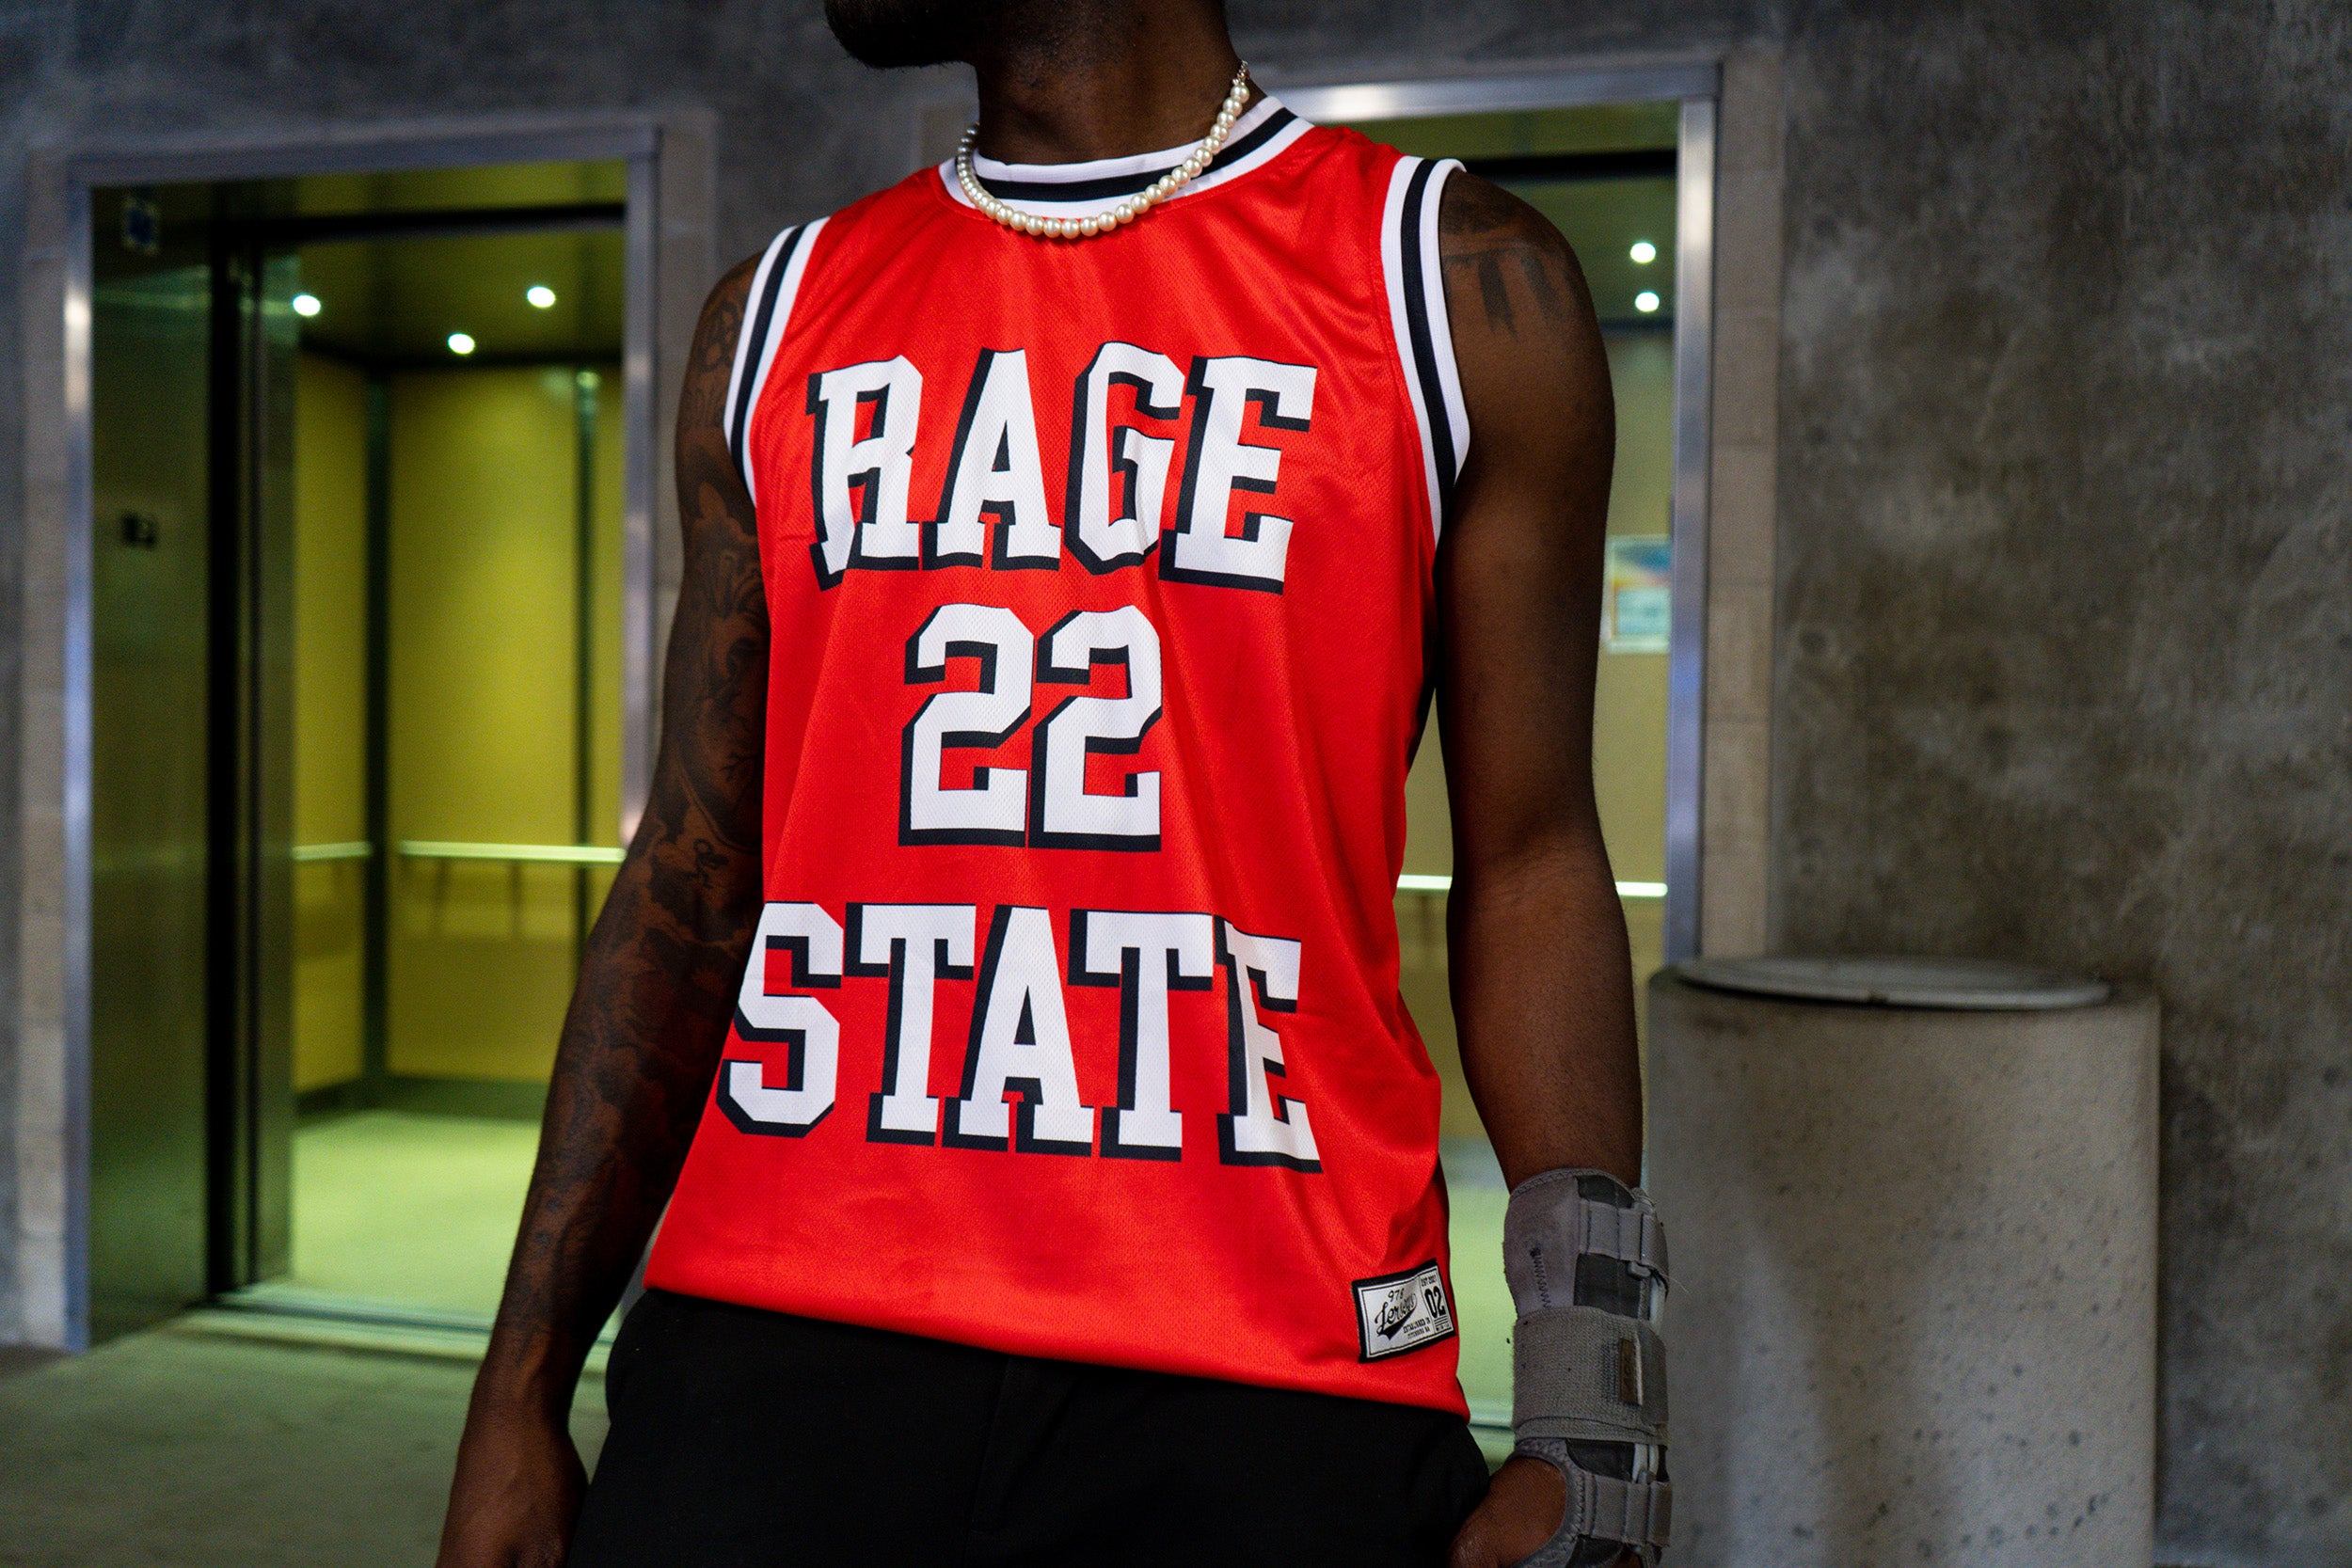 Authentic Rage State Basketball Jersey